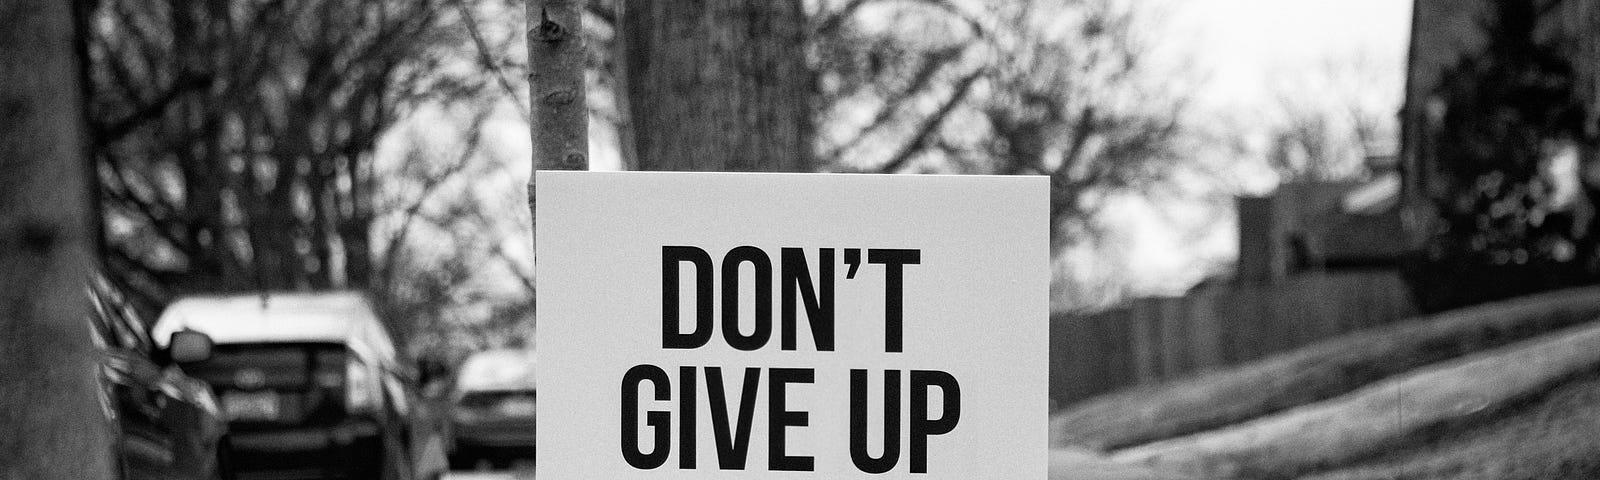 sign next to a sidewalk reading “don’t give up”